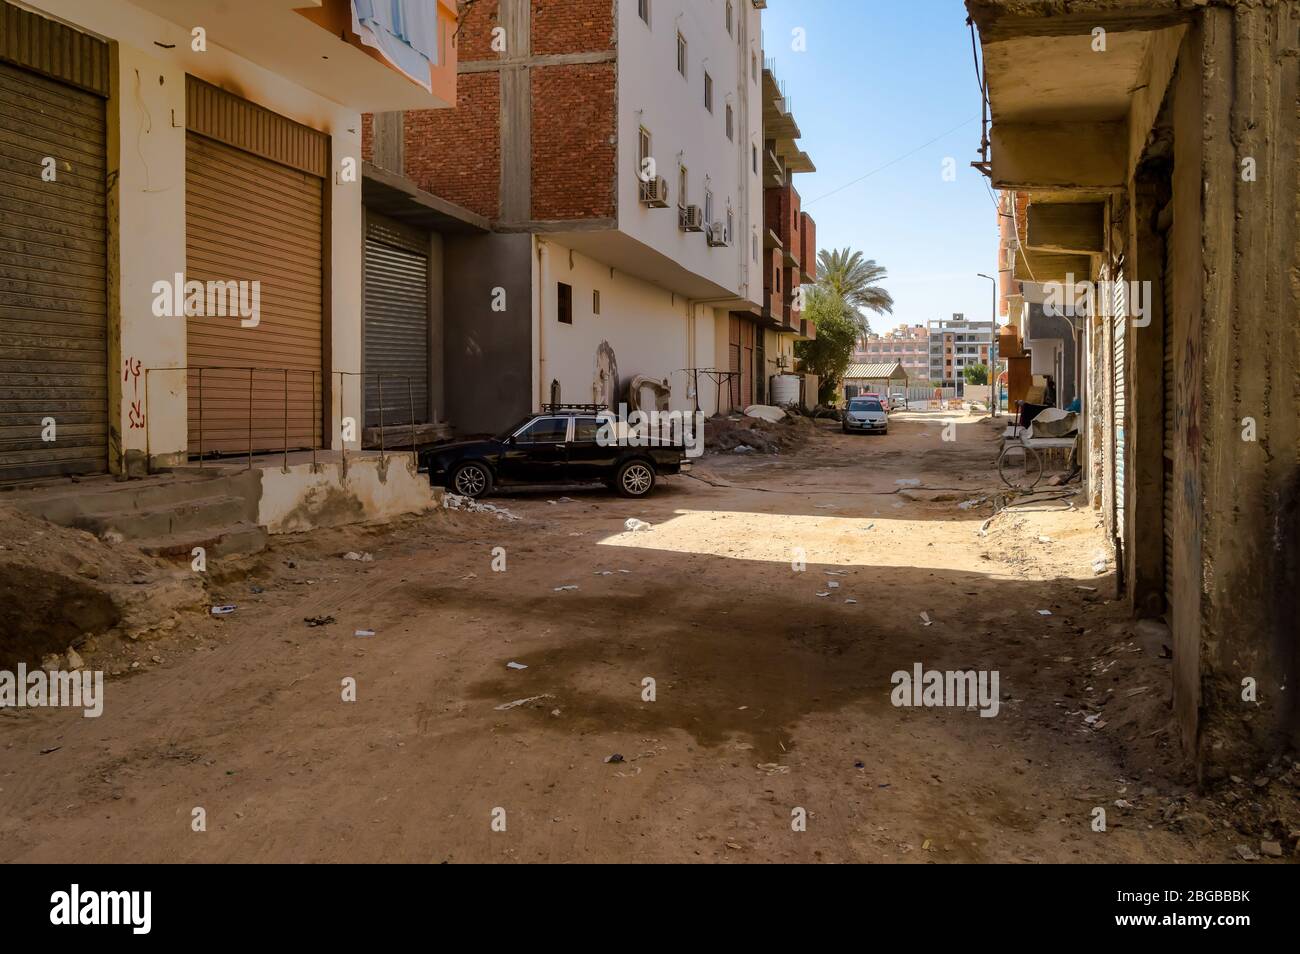 Egypt, Hurghada, dirt street with multi-family houses and old cars Stock Photo